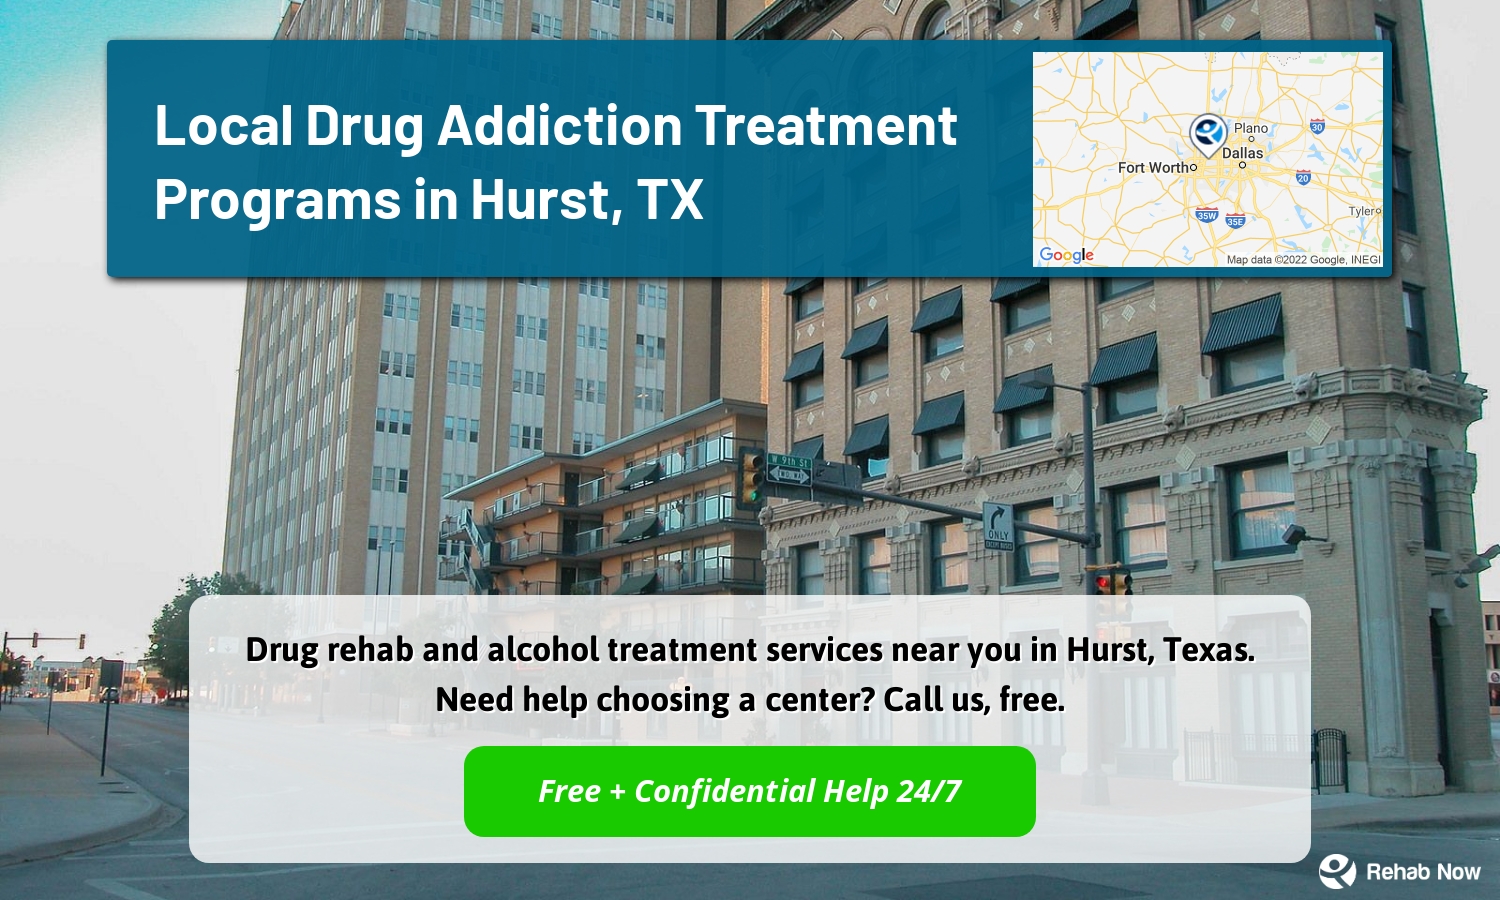 Drug rehab and alcohol treatment services near you in Hurst, Texas. Need help choosing a center? Call us, free.